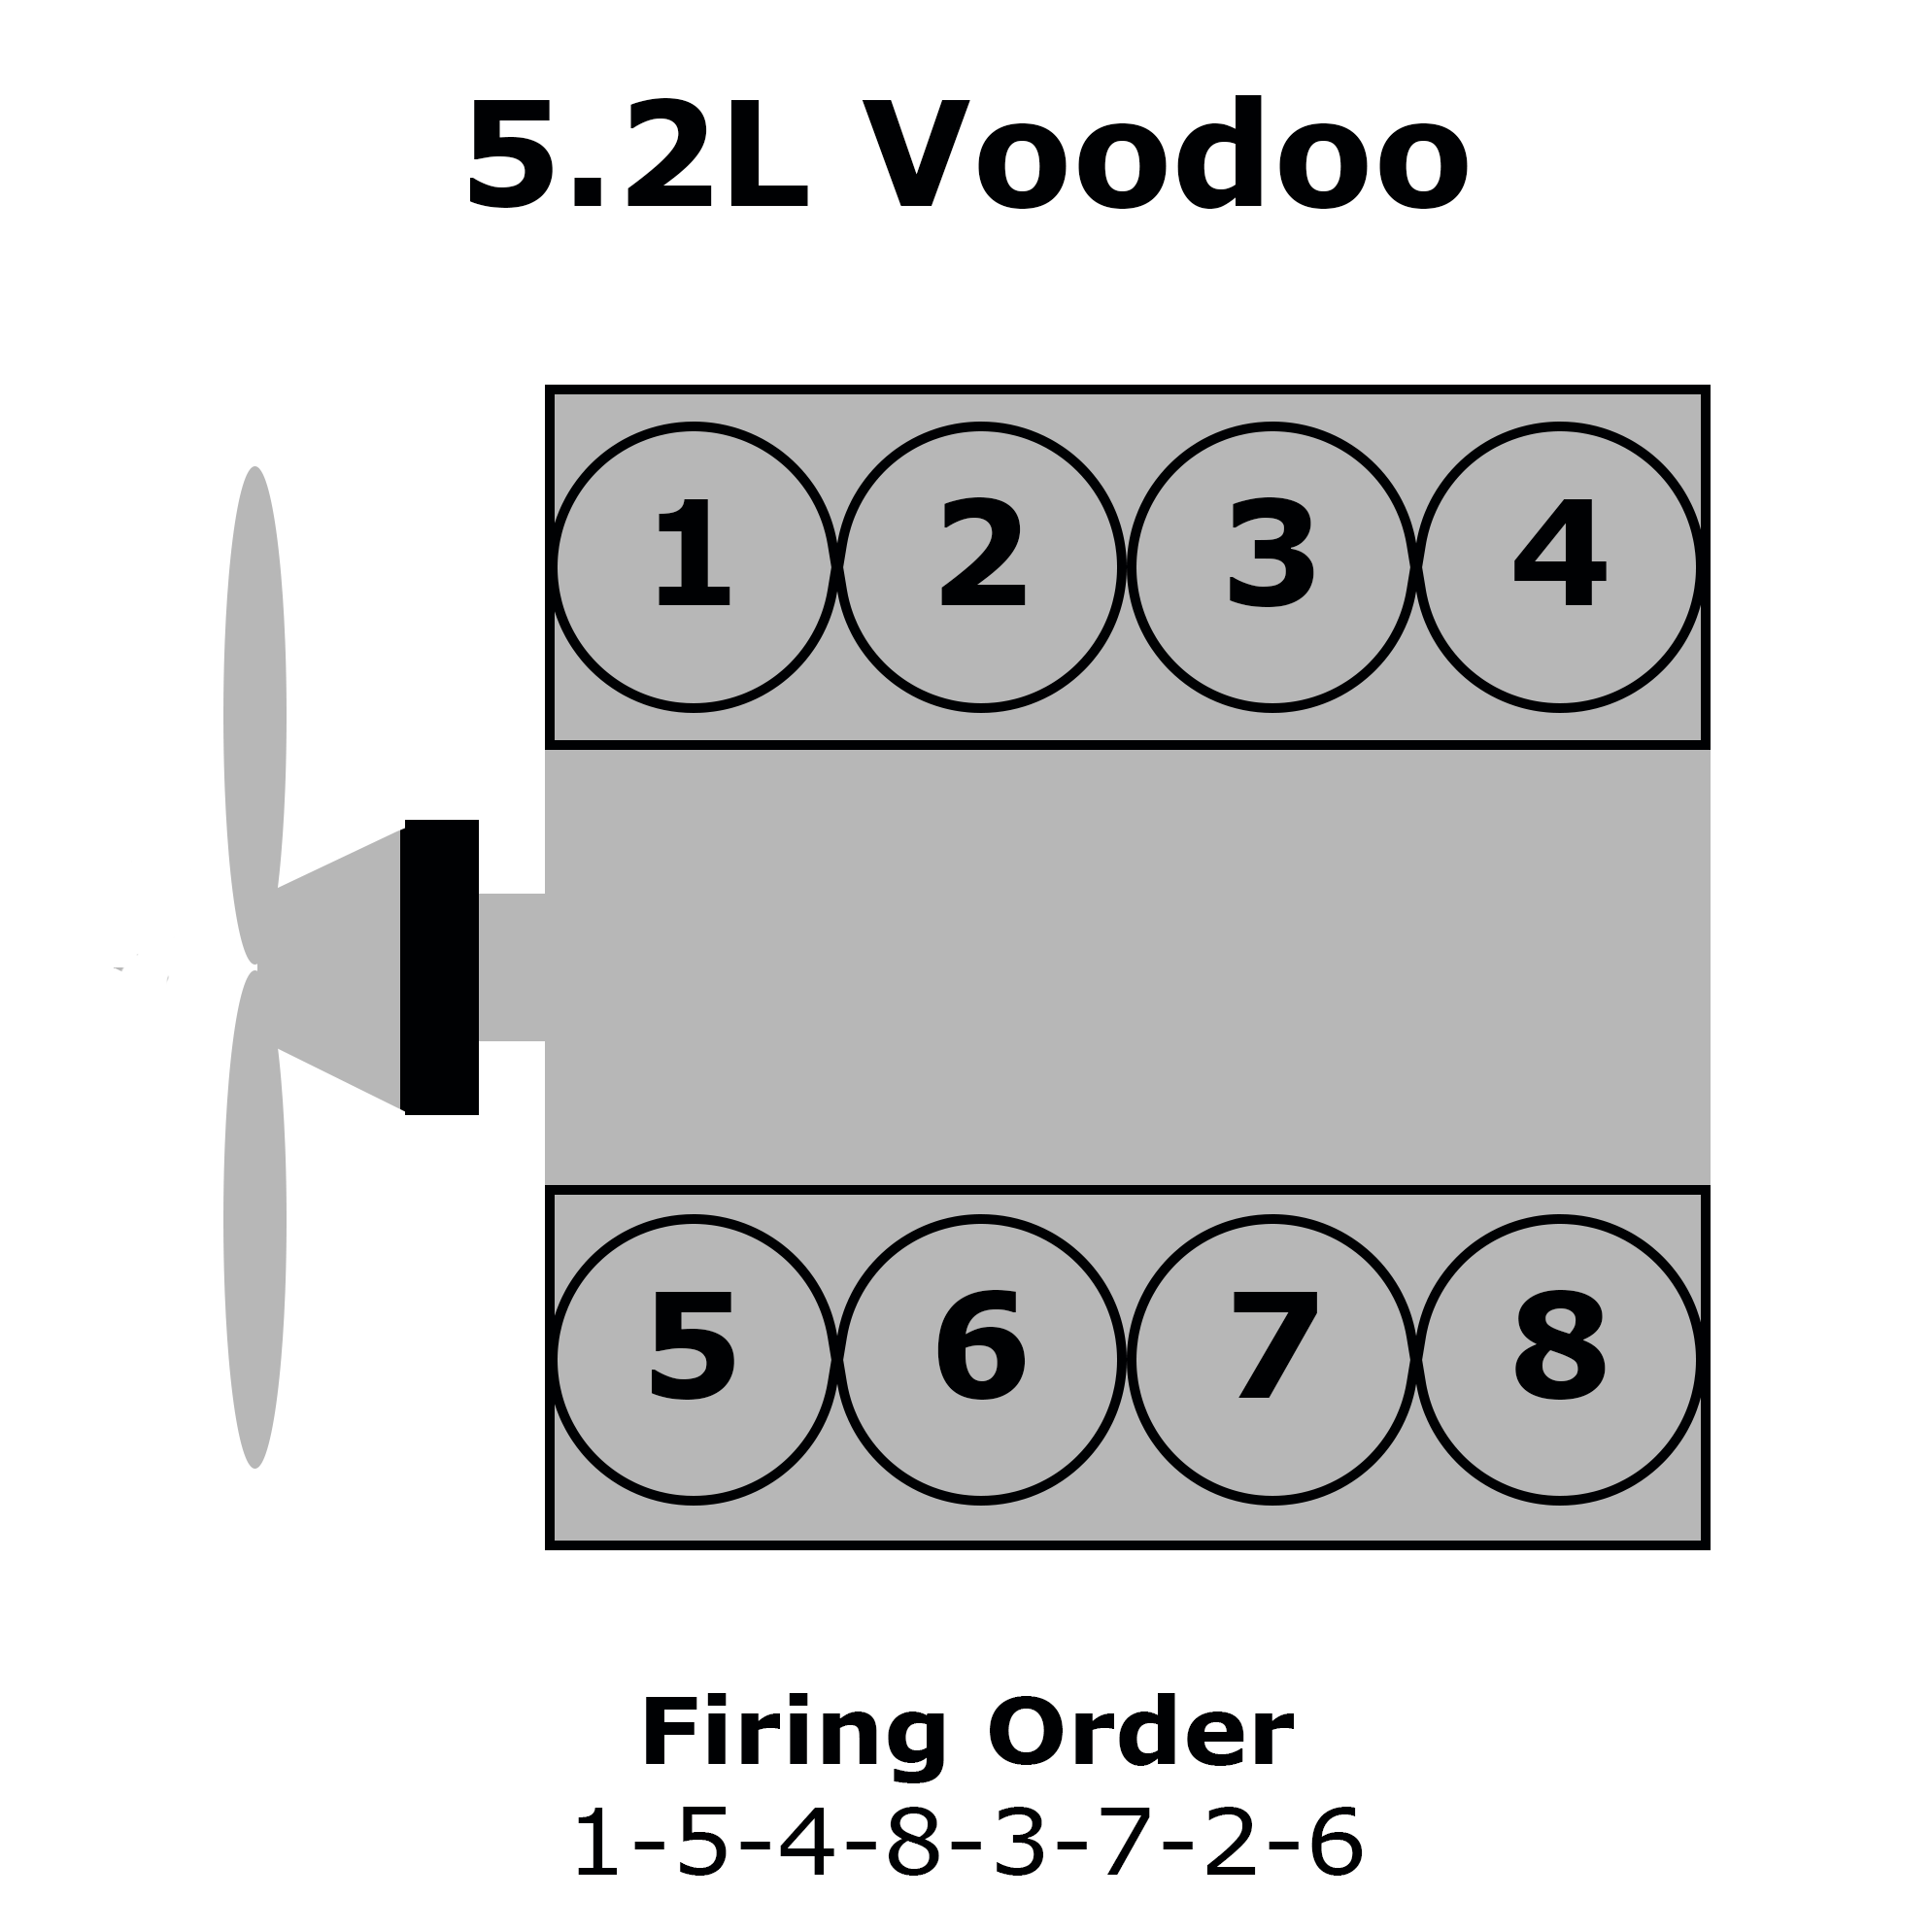 Ford Voodoo Cylinder Numbering, Distributor Rotation, and Firing Order